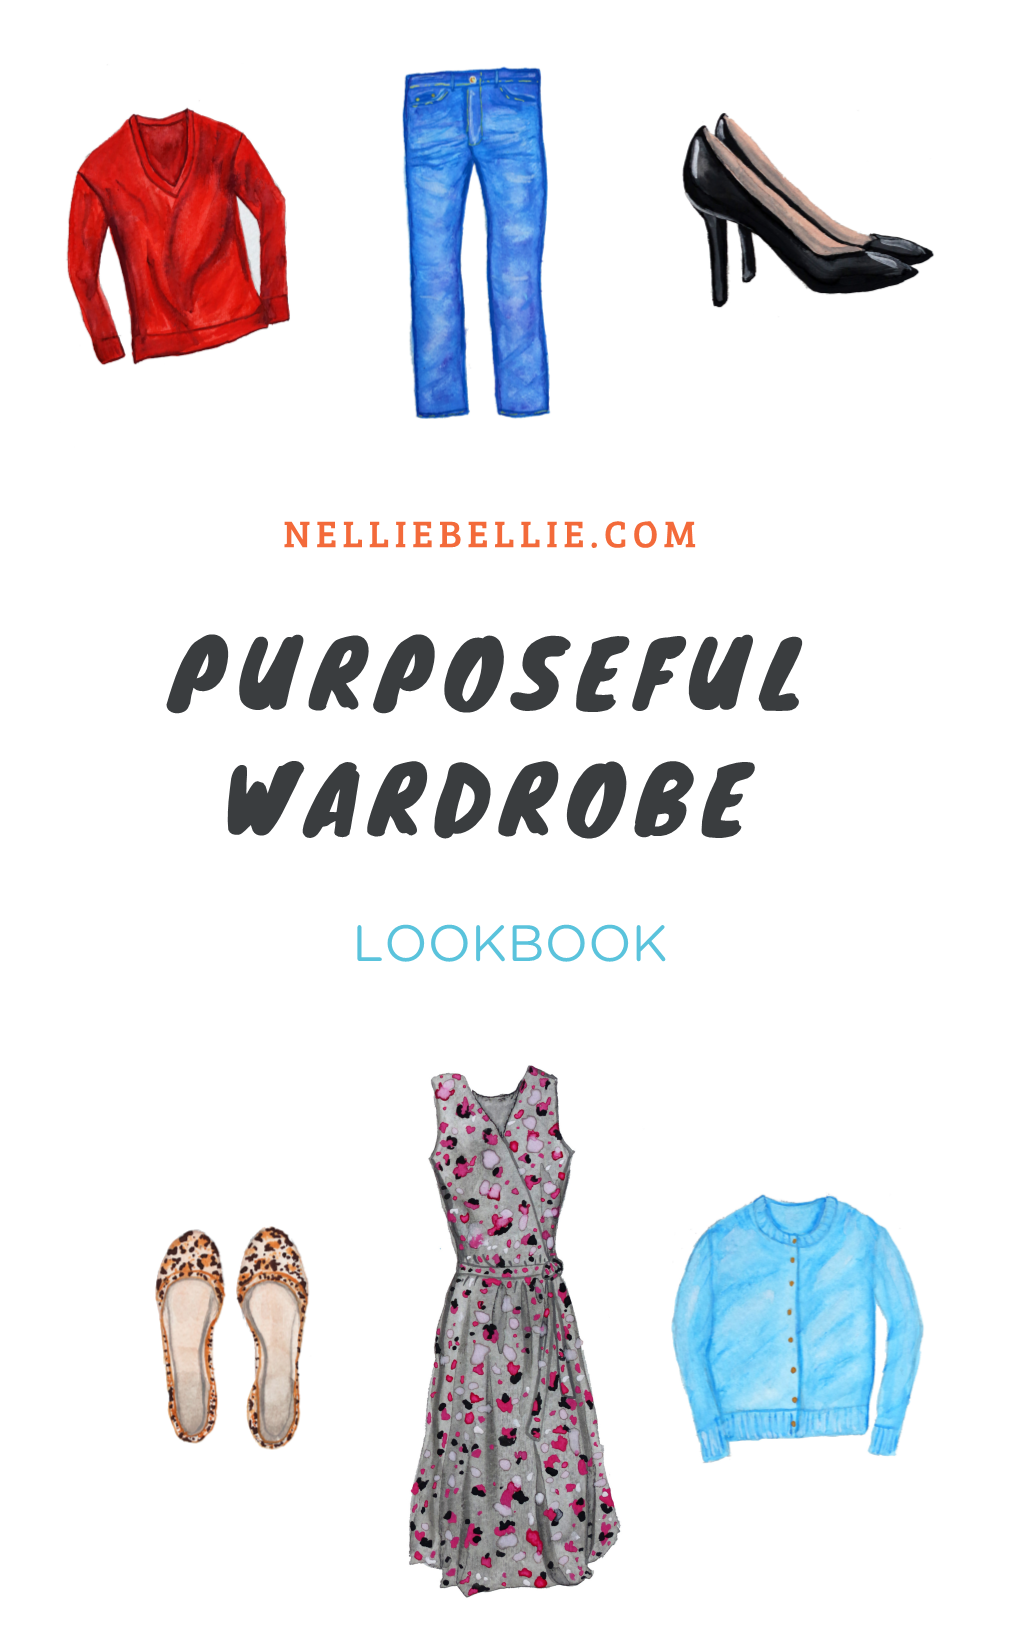 LOOKBOOK Here’S to All You Lovely Ladies Thinking and Wondering About a Capsule Wardrobe